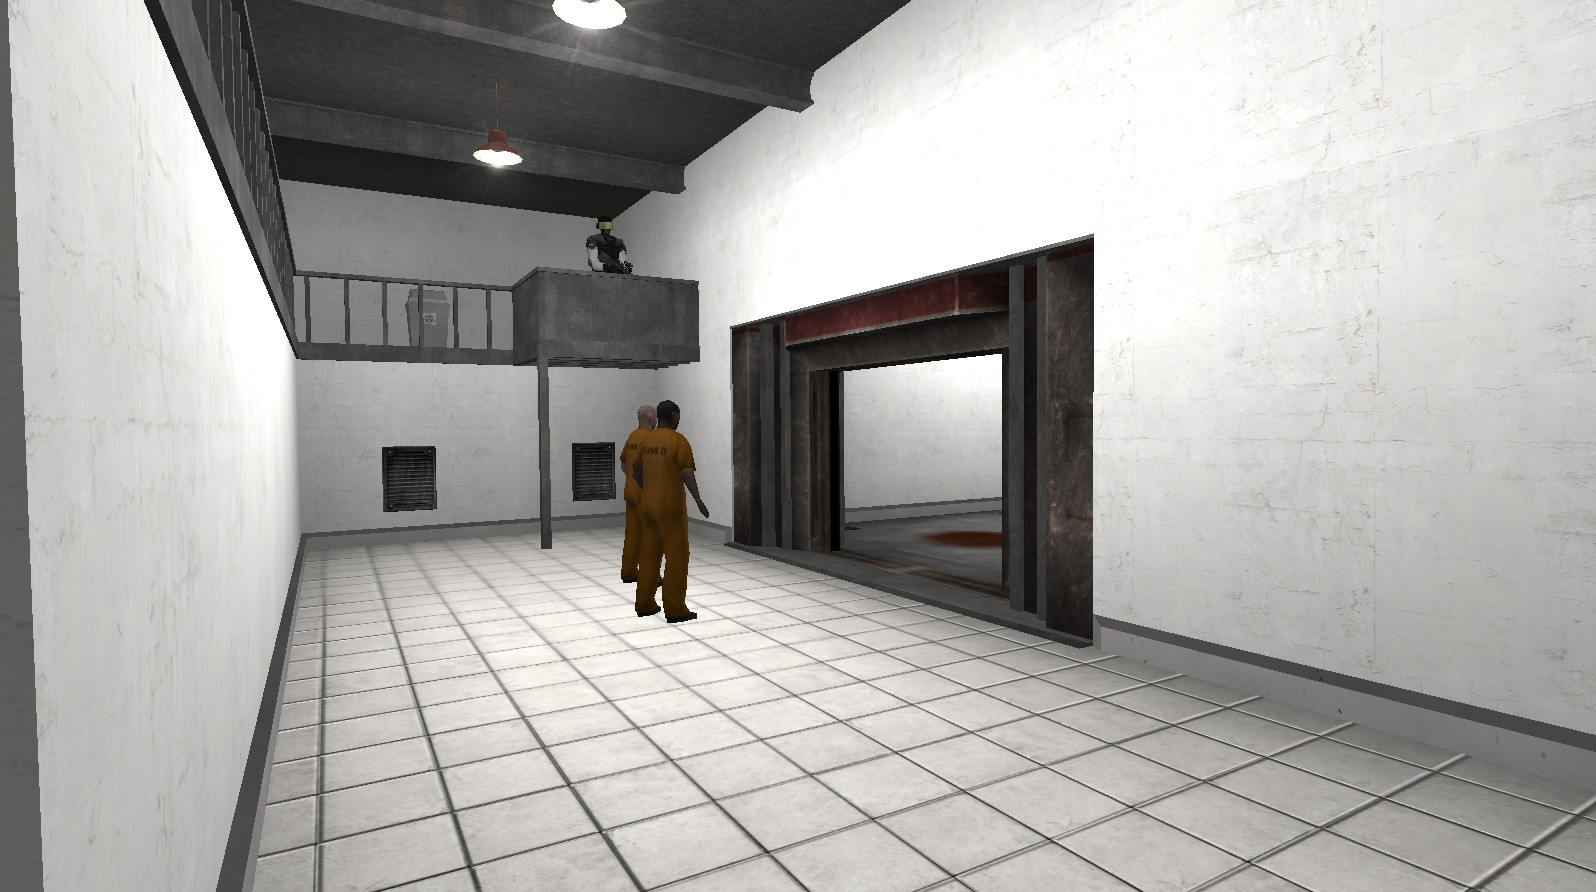 SCP - Containment Breach for Android - Download the APK from Uptodown